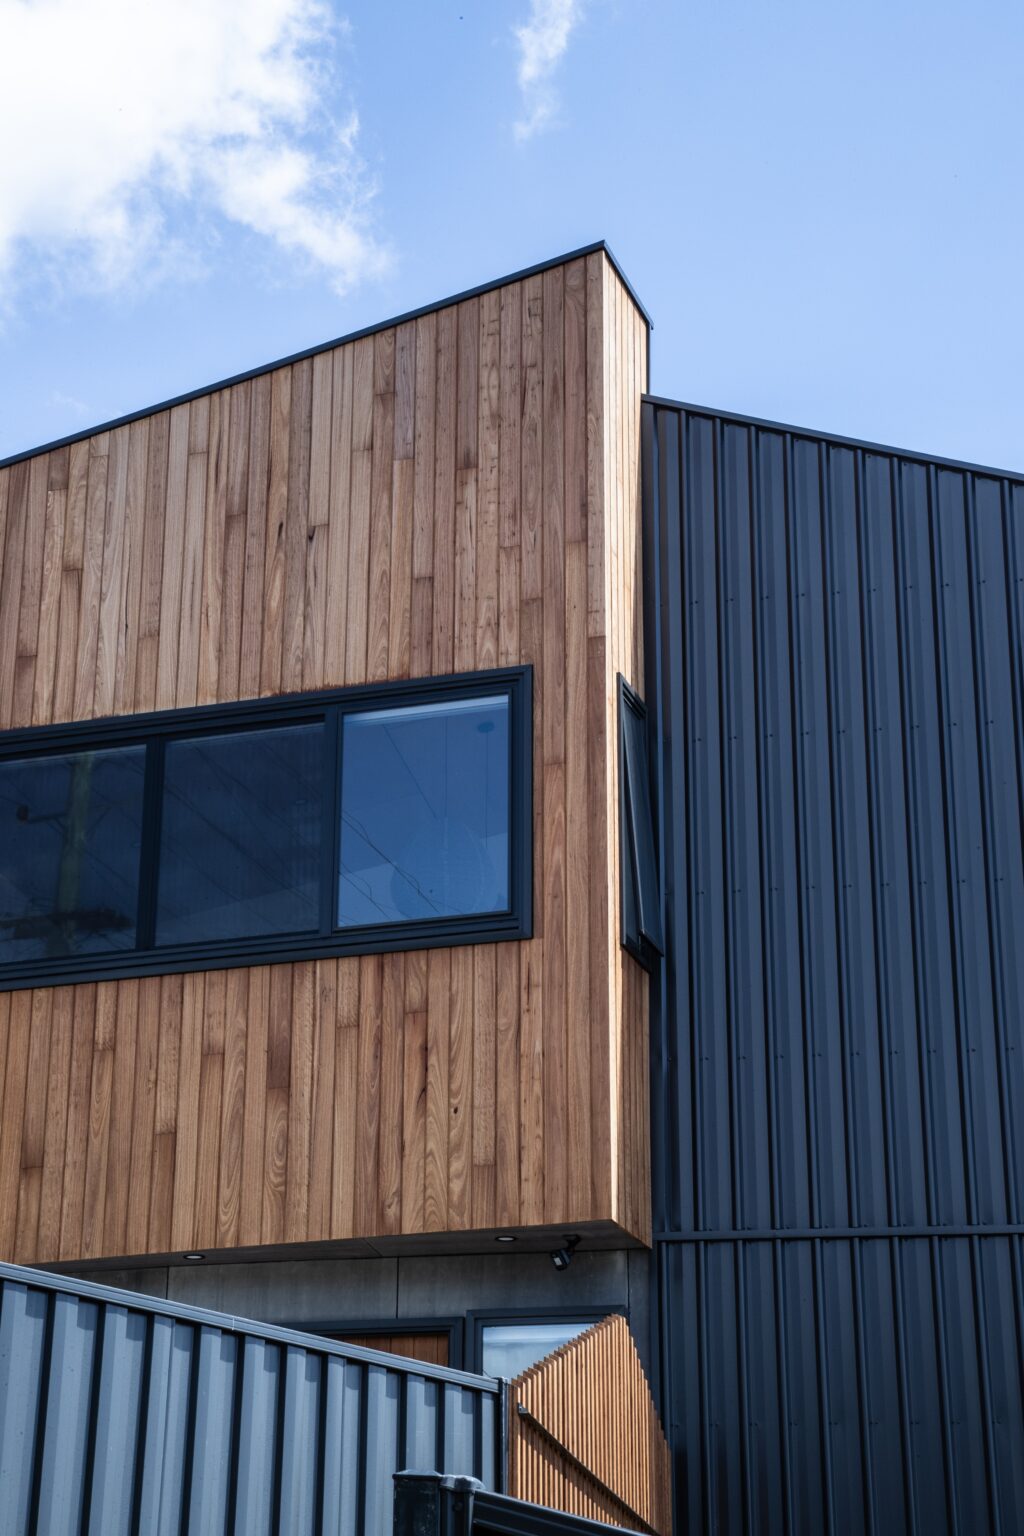 Modern Exterior with mixed siding materials